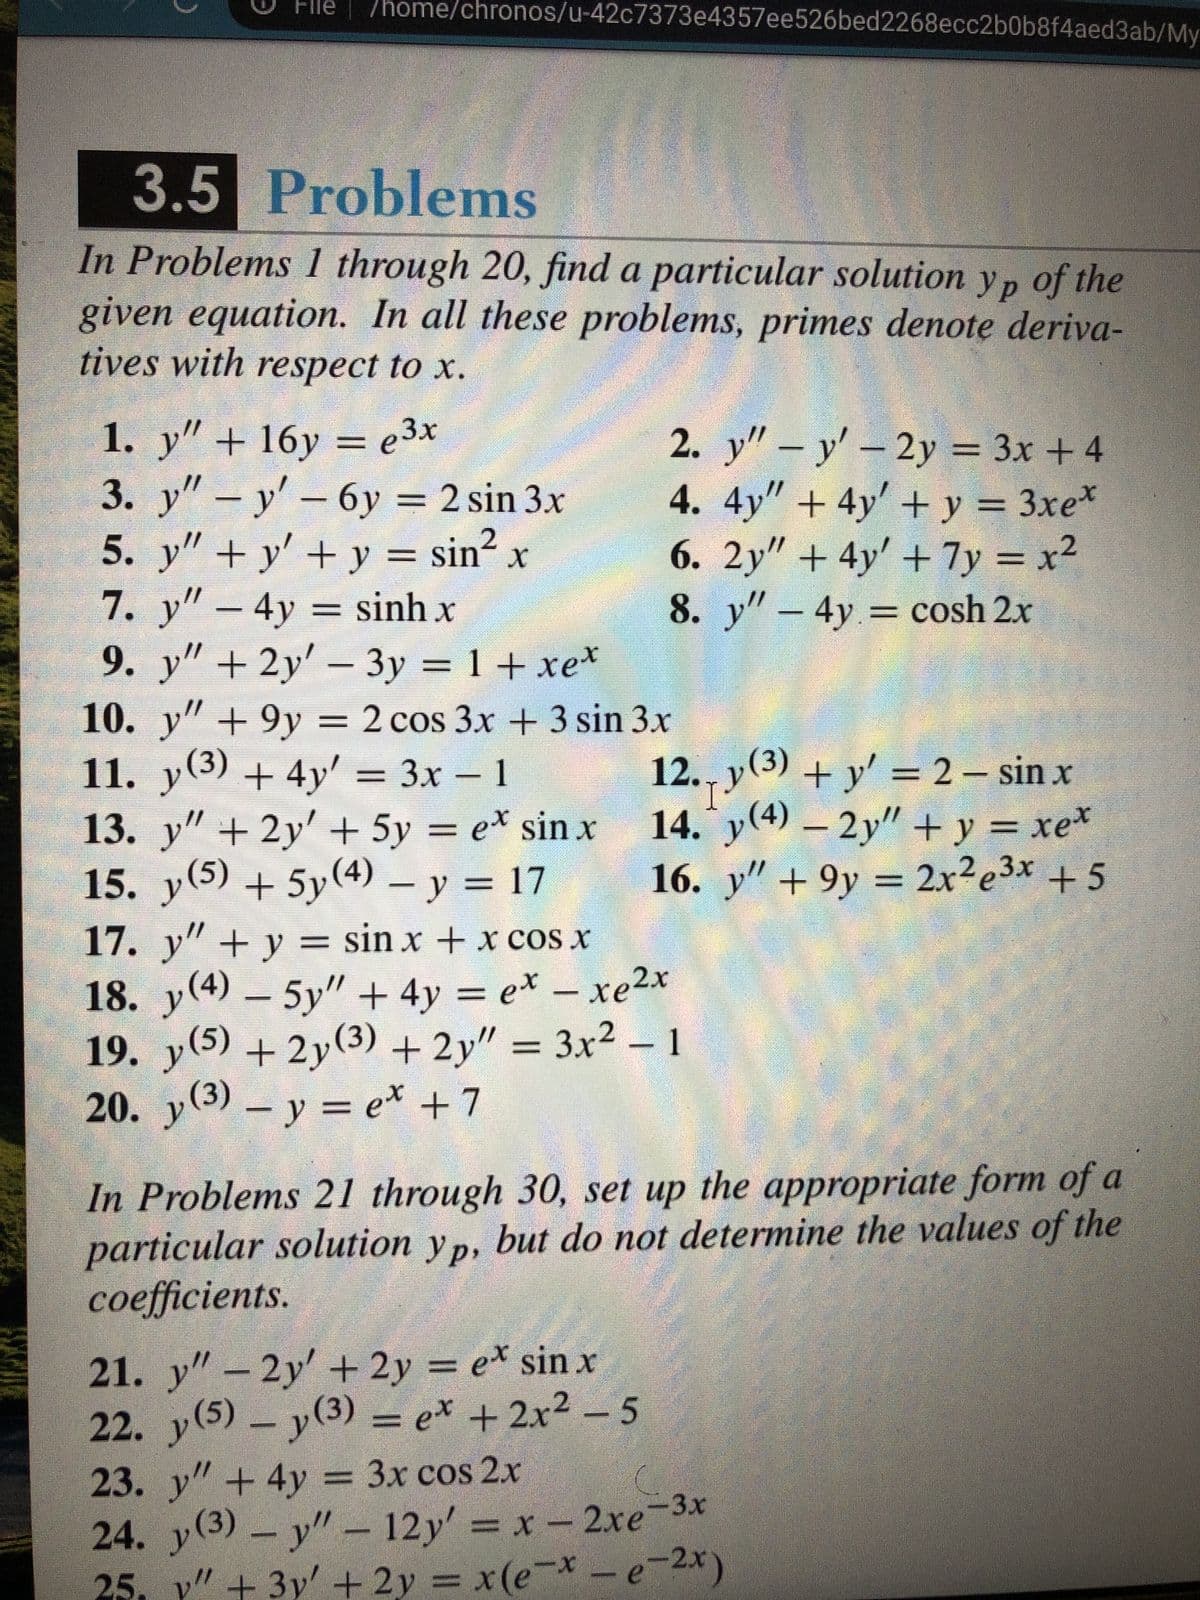 File
/home/chronos/u-42c7373e4357ee526bed2268ecc2b0b8f4aed3ab/My
3.5 Problems
In Problems 1 through 20, find a particular solution yp of the
given equation. In all these problems, primes denote deriva-
tives with respect to x.
1. y" + 16y = e3x
3. y"- y' - 6y = 2 sin 3.x
5. y" + y' + y = sin? x
7. y" – 4y = sinh x
9. y" + 2y'- 3y = 1+ xe*
2. y" – y' – 2y = 3x + 4
4. 4y" + 4y' + y = 3xe*
6. 2y" + 4y' + 7y = x2
8. y"-4y= cosh 2x
%3D
%3D
10. y"+9y = 2 cos 3x + 3 sin 3x
11. y(3) + 4y' = 3x – 1
13. y" + 2y' + 5y = e* sin x
15. y(5) + 5y(4) - y = 17
12., y(3) + y' = 2 – sin x
I.
14. y(4) – 2y" + y = xe*
16. y" +9y
= 2x²e3x +5
%3D
17. y"+ y = sin x + x cos x
18. y(4) - 5y" + 4y = e* – xe2x
//
(s)A
19. y(5) + 2y(3) + 2y" = 3x² – 1
20. y(3) – y = e* +7
( -
In Problems 21 through 30, set up the appropriate form of a
particular solution yp, but do not determine the values of the
coefficients.
21. y" - 2y' + 2y = e* sin x
22. y(5) y(3) = e* + 2x² – 5
23. y"+4y = 3x cos 2x
(3)
//
24. y - y" – 12y' = x-2xe-3x
25. y" + 3y' + 2y = x(e-* -e-2x)
(x)
